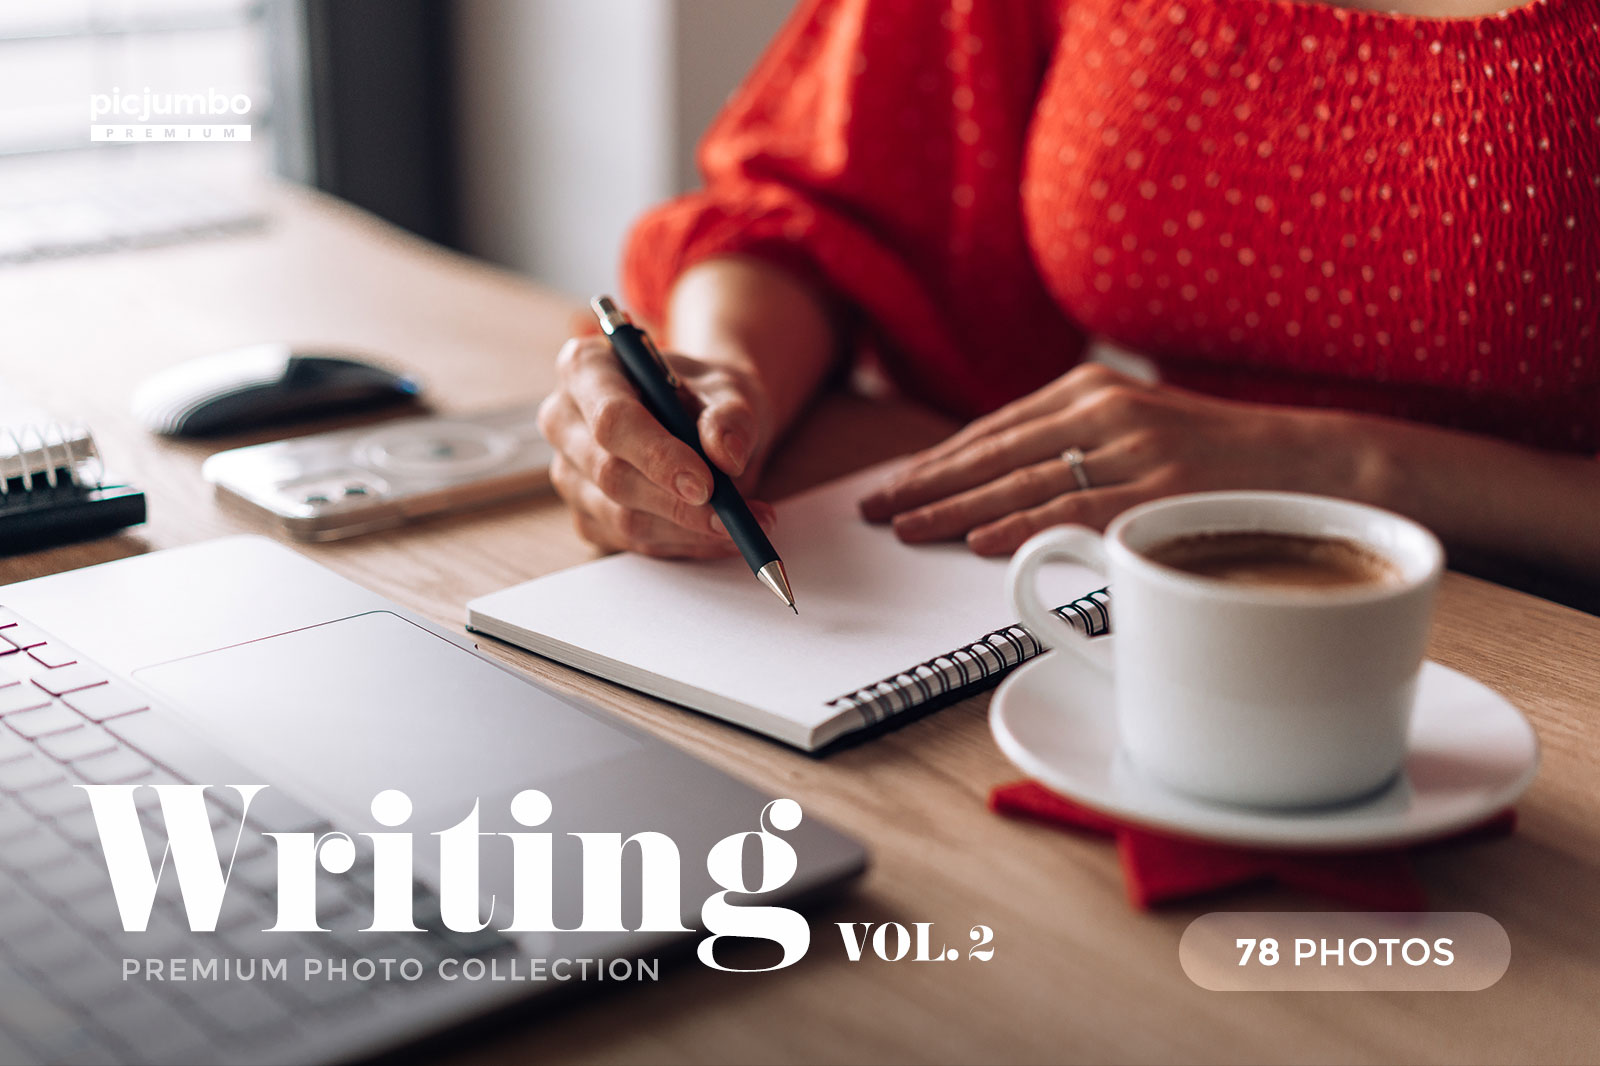 Download hi-res stock photos from our Writing Vol. 2 PREMIUM Collection!